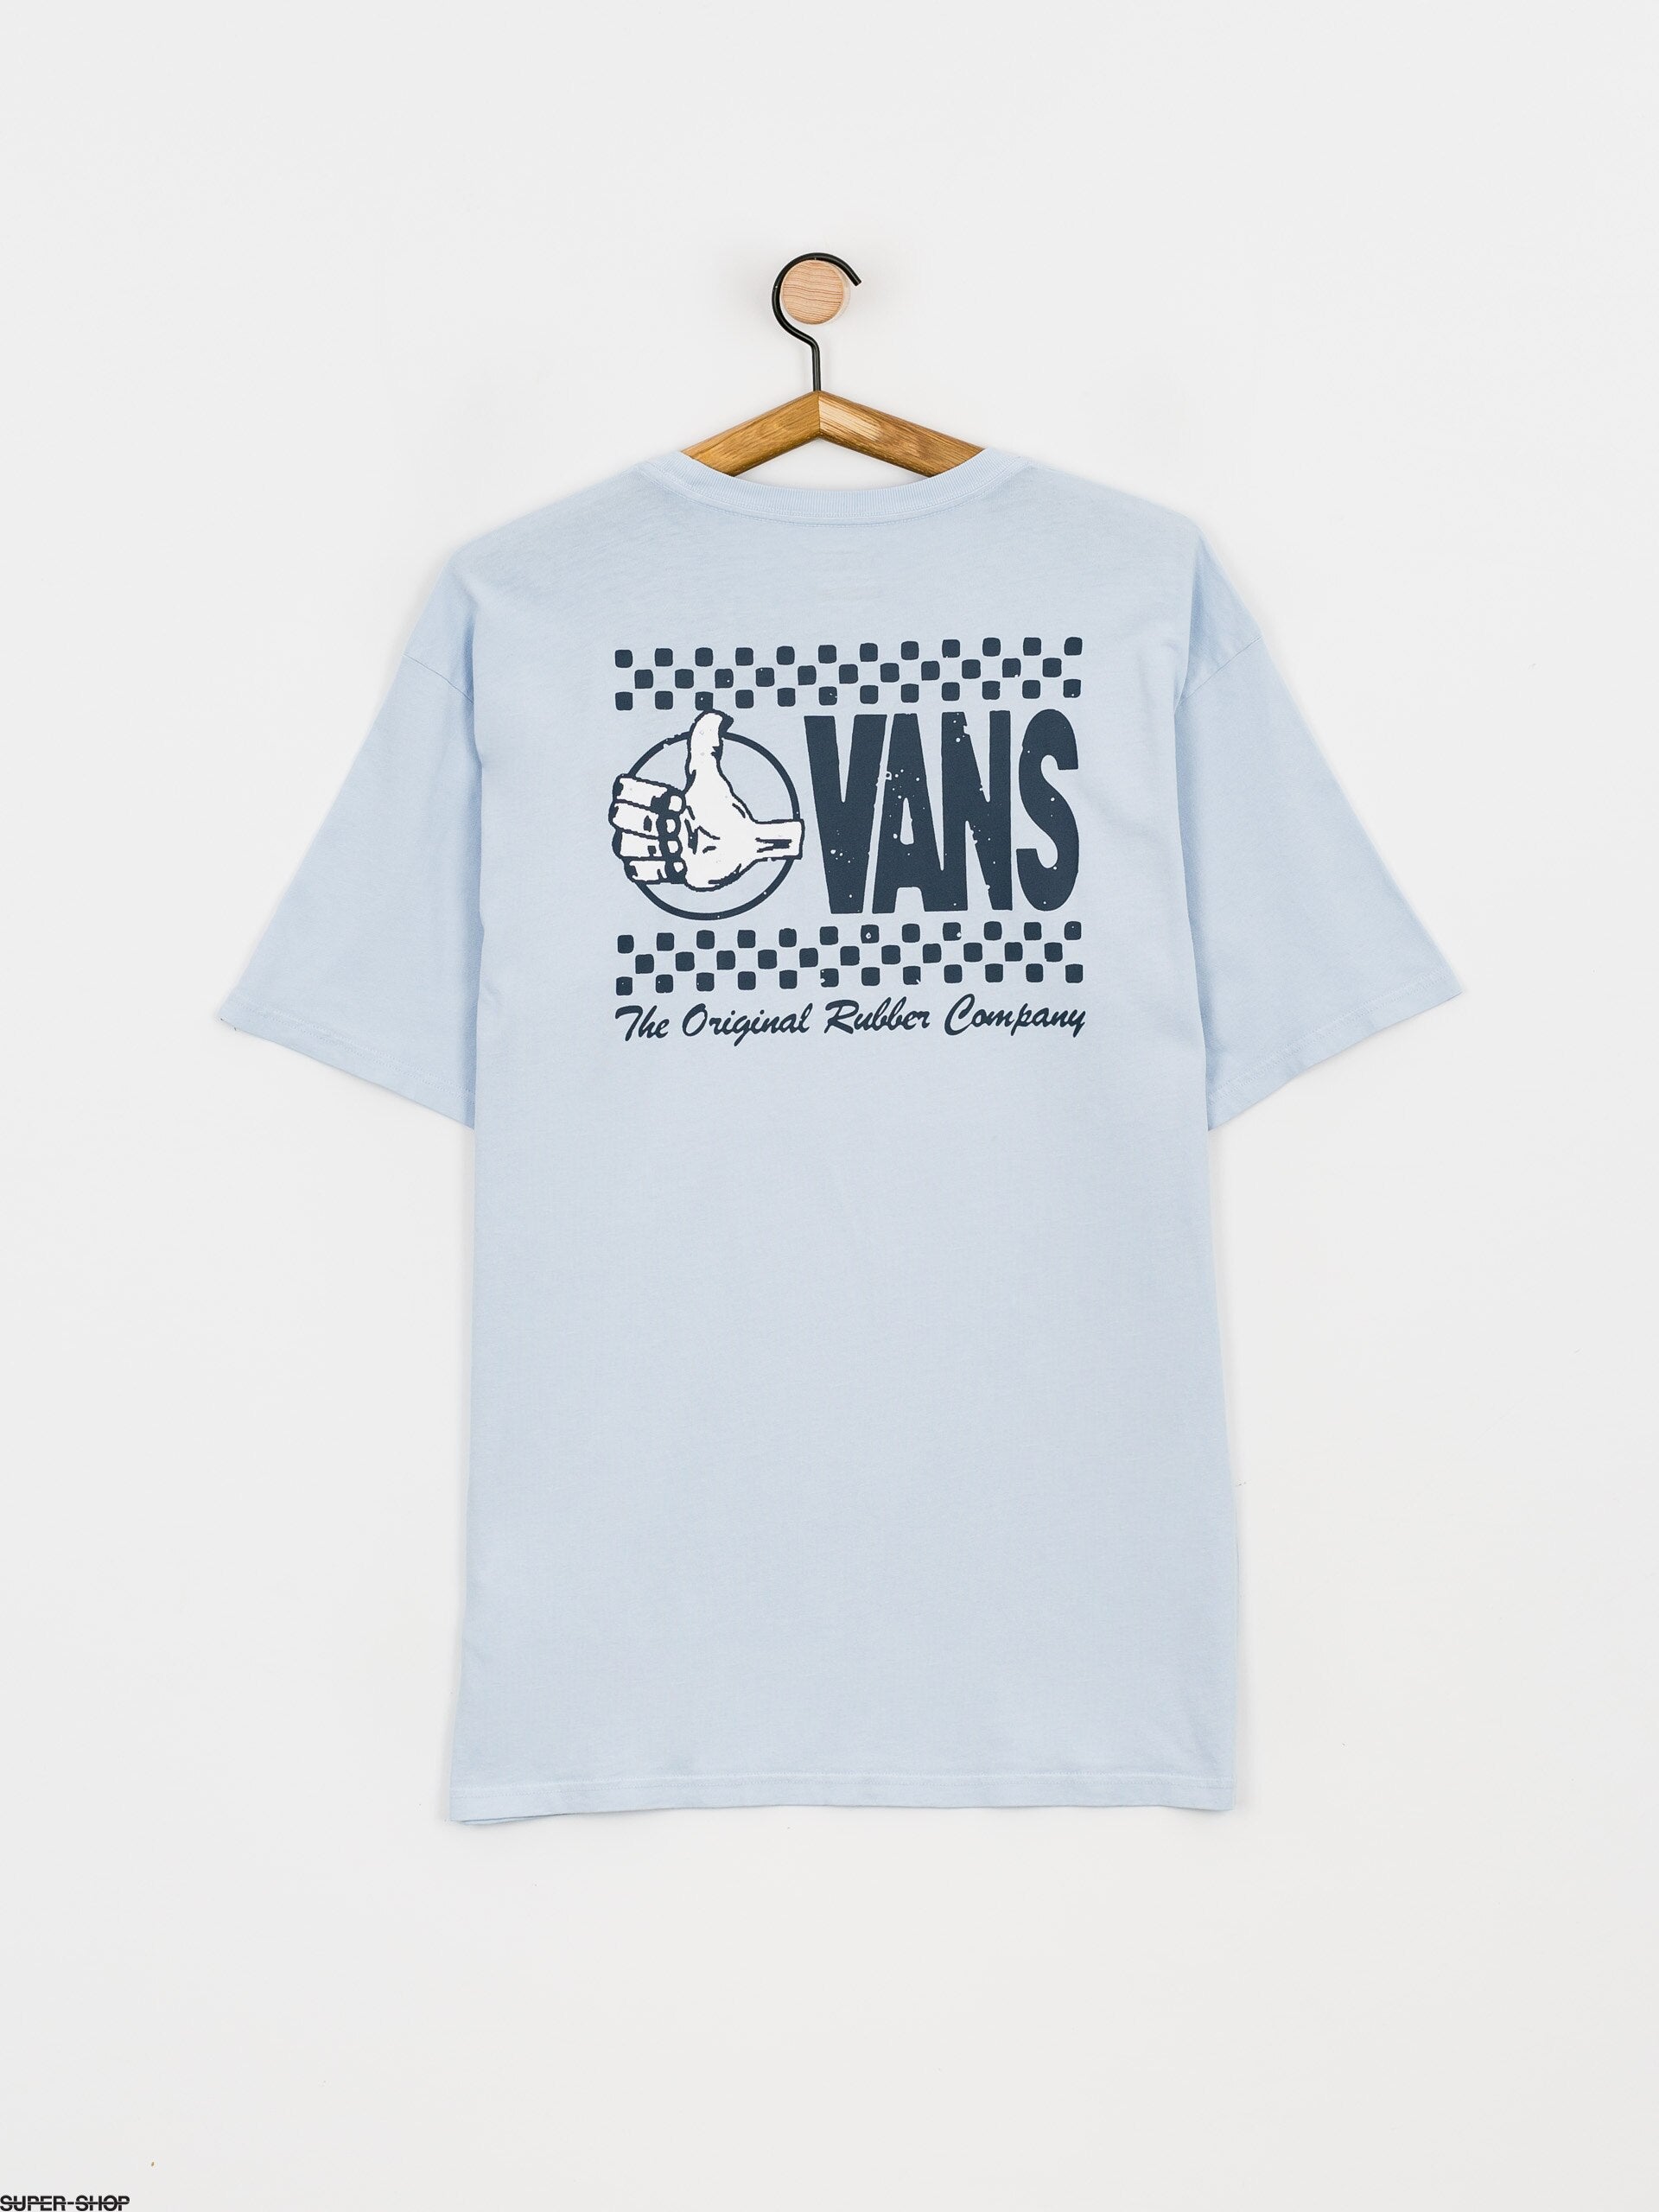 Vans | 66 Thumbs Up Goods And SS T-Shirt | Cashmere Supply - Blue Gunthers